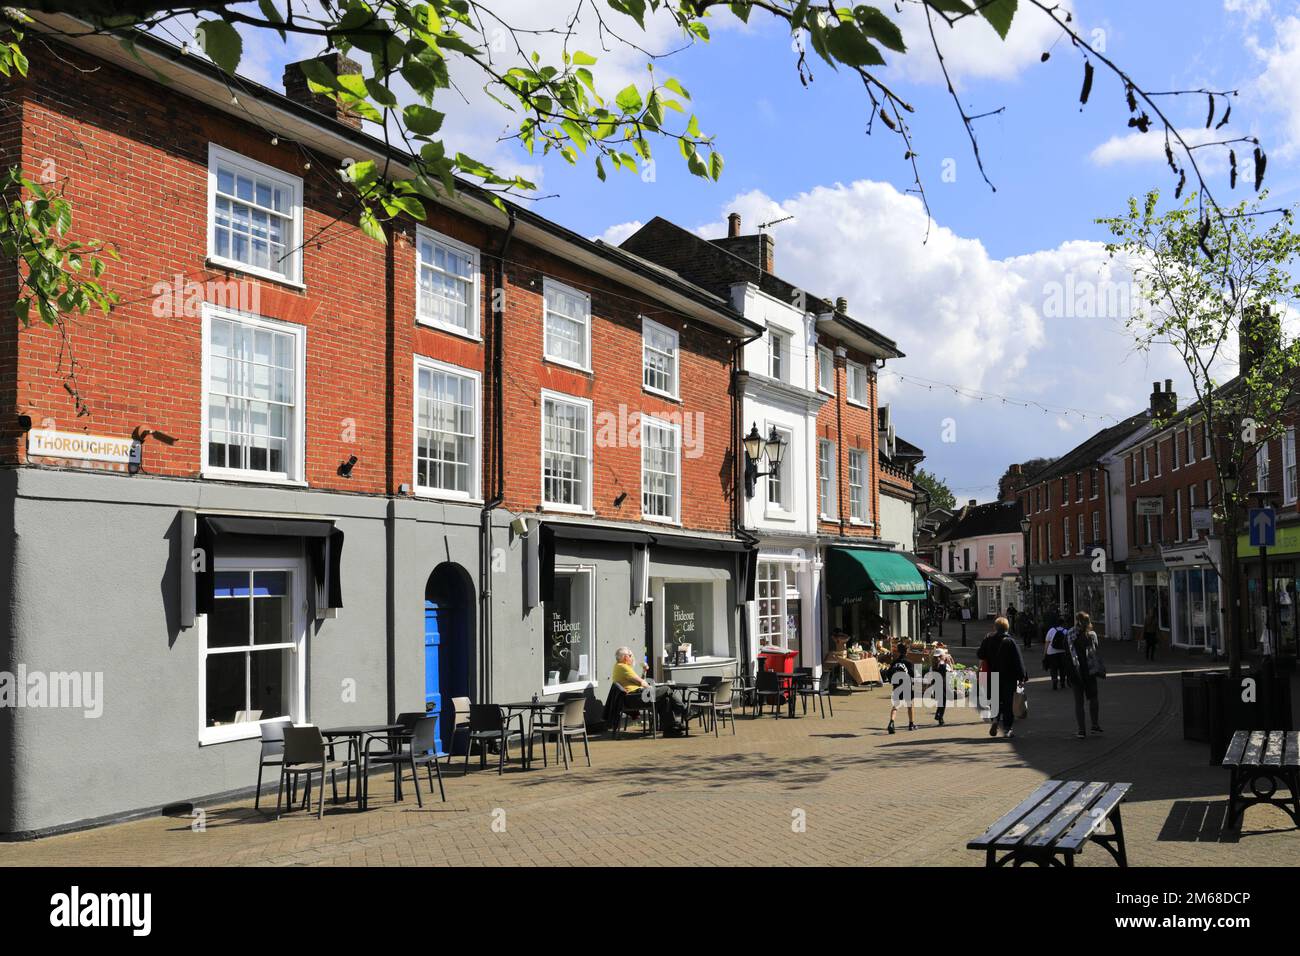 Shops and cafes in the Thoroughfare street, Halesworth market town, Suffolk, England, UK Stock Photo